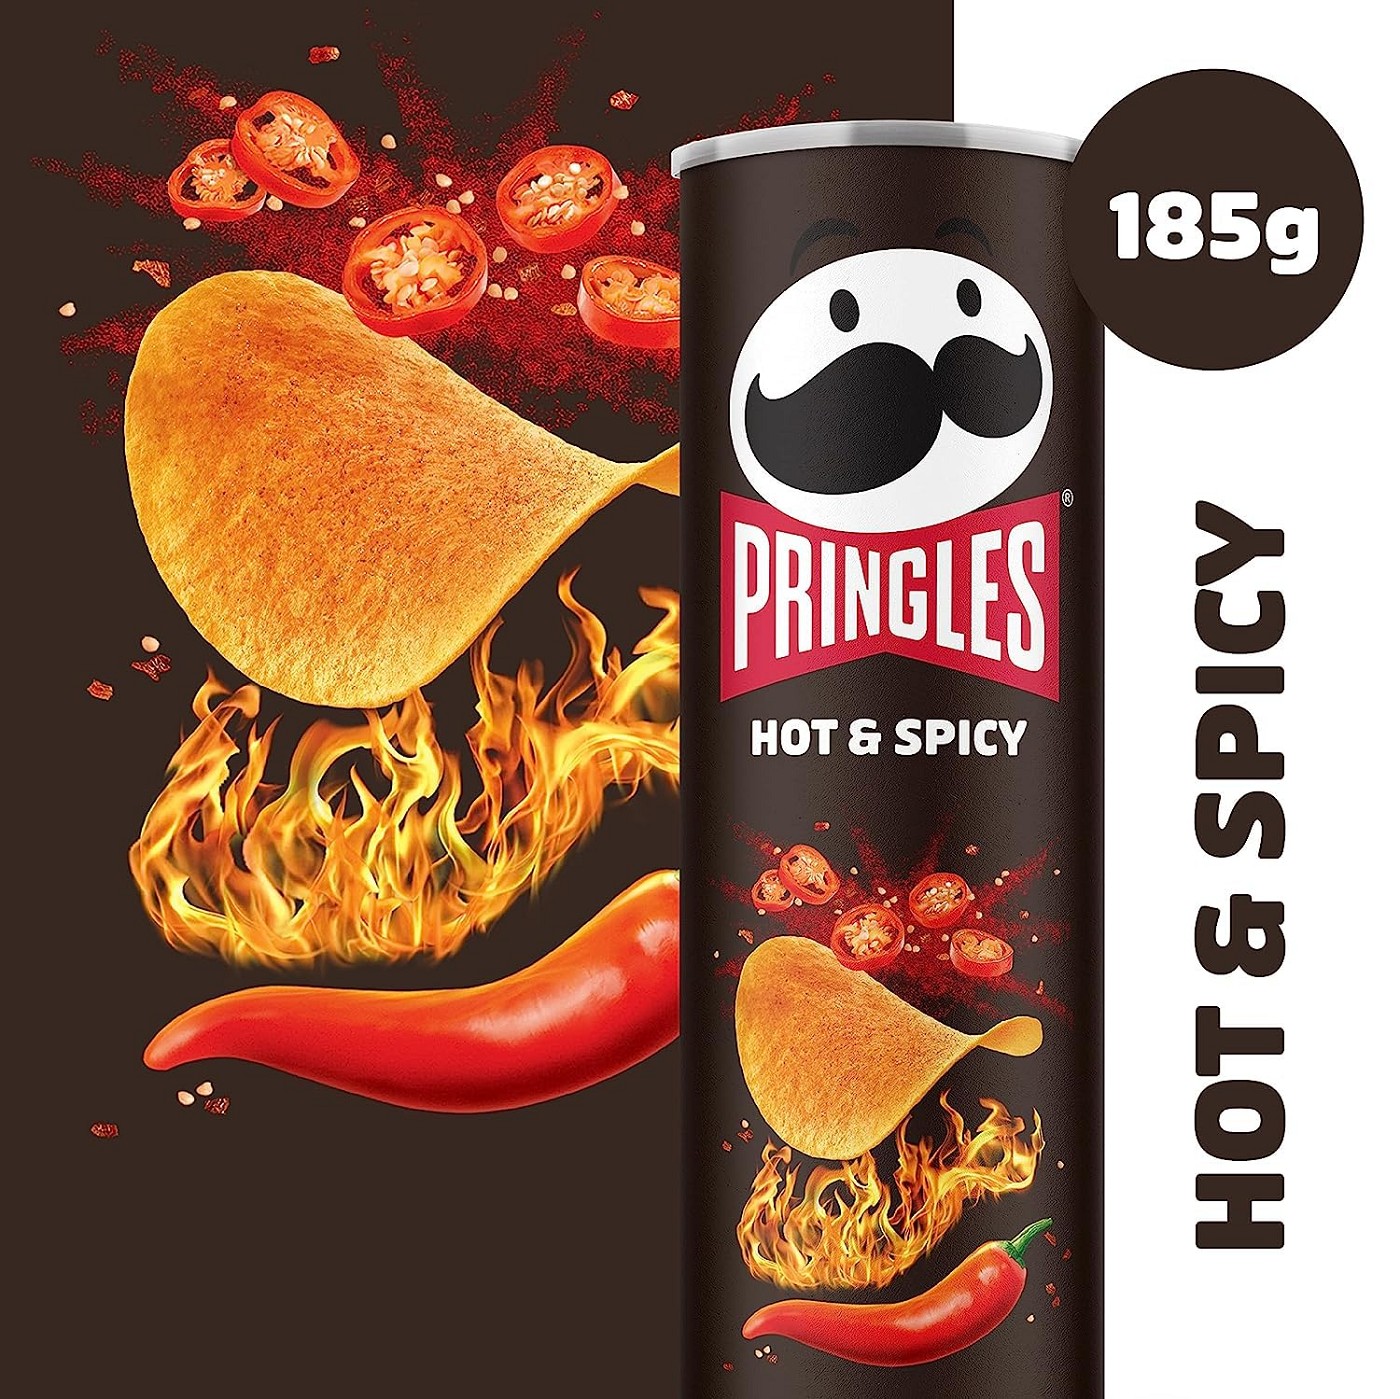 PRINGLES HOT & SPICY 8x185g Dose Sparpack